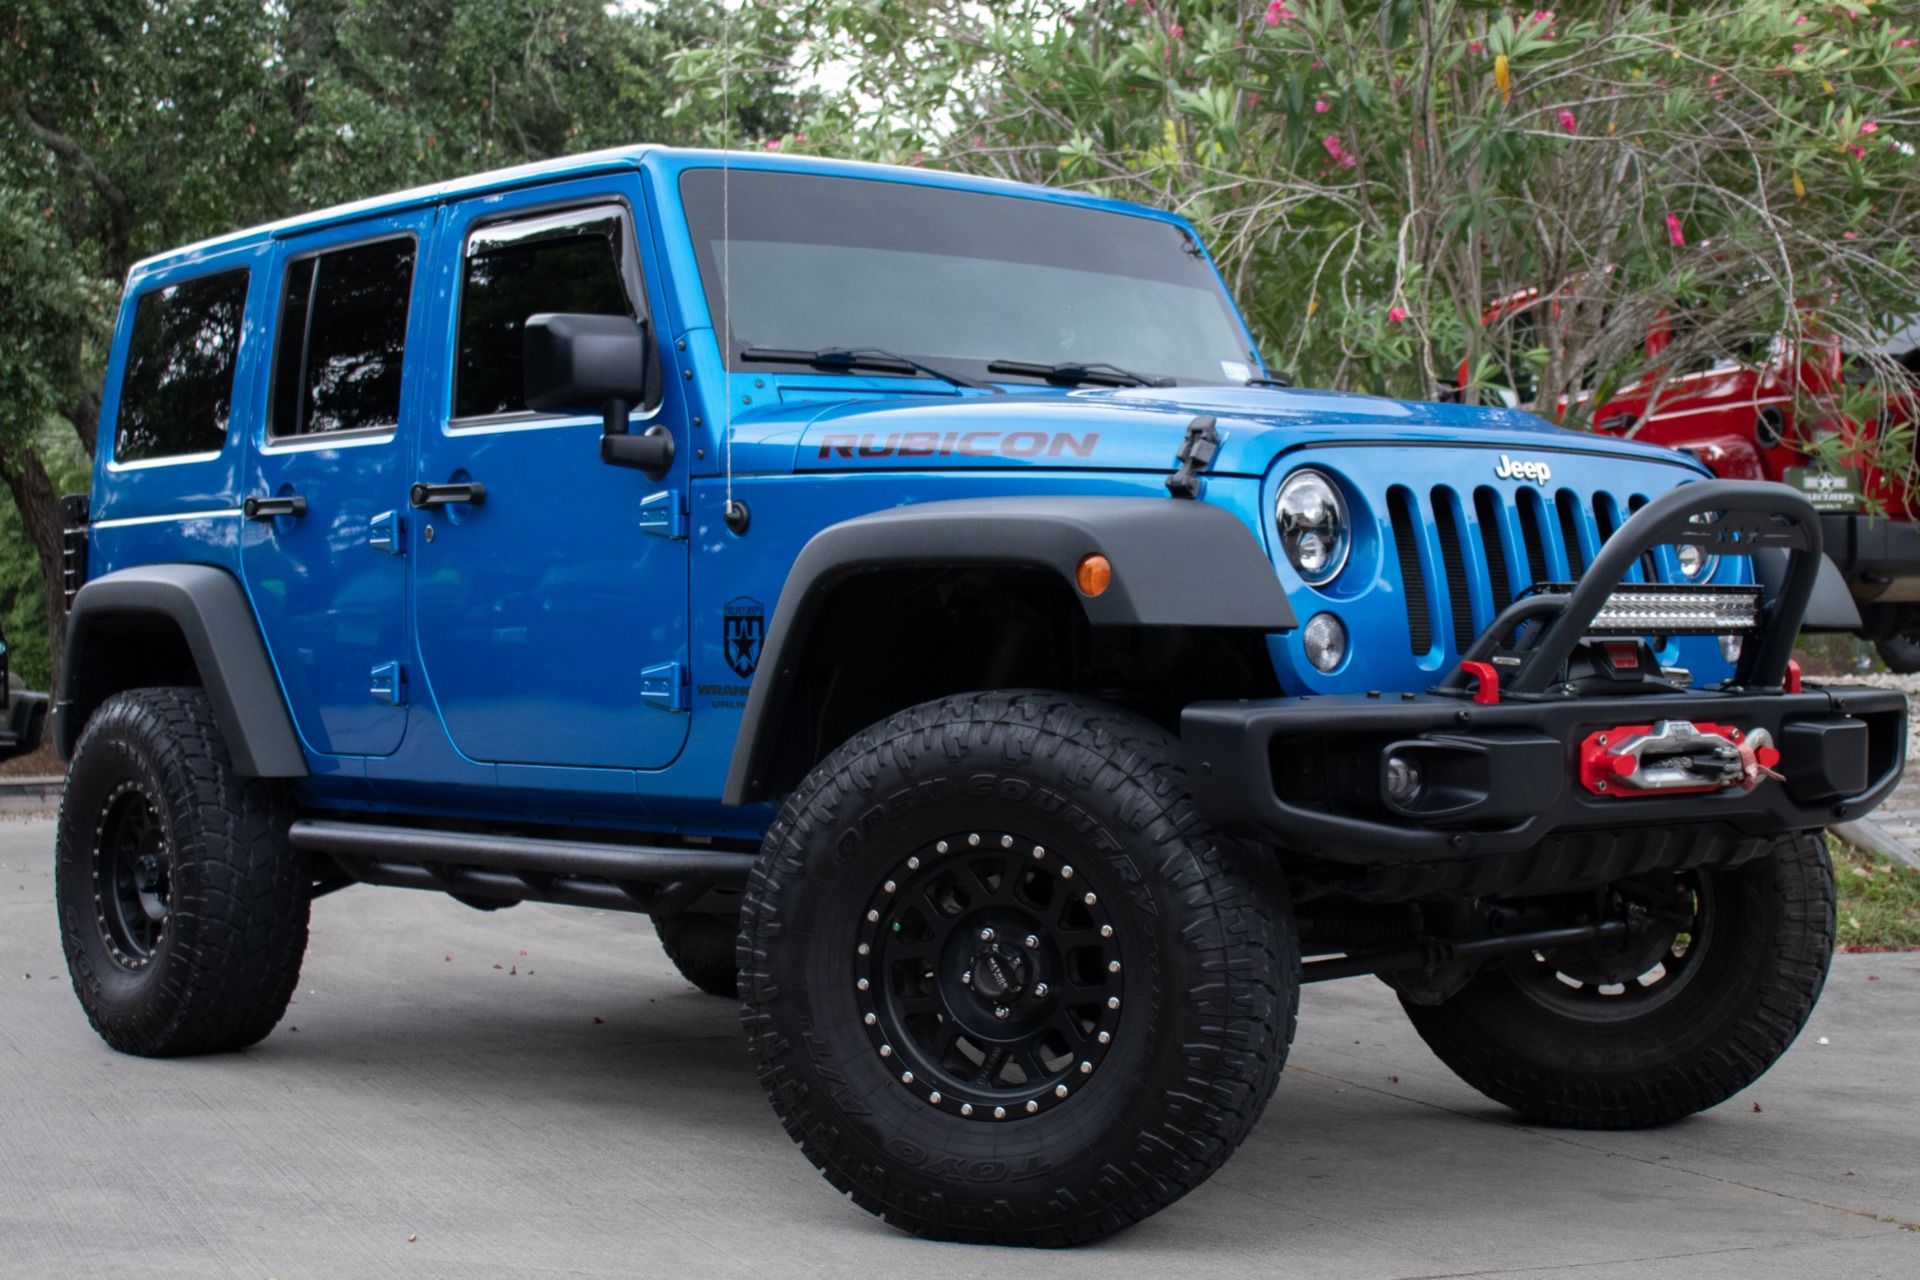 Used 16 Jeep Wrangler Unlimited Rubicon Hard Rock For Sale 37 995 Select Jeeps Inc Stock